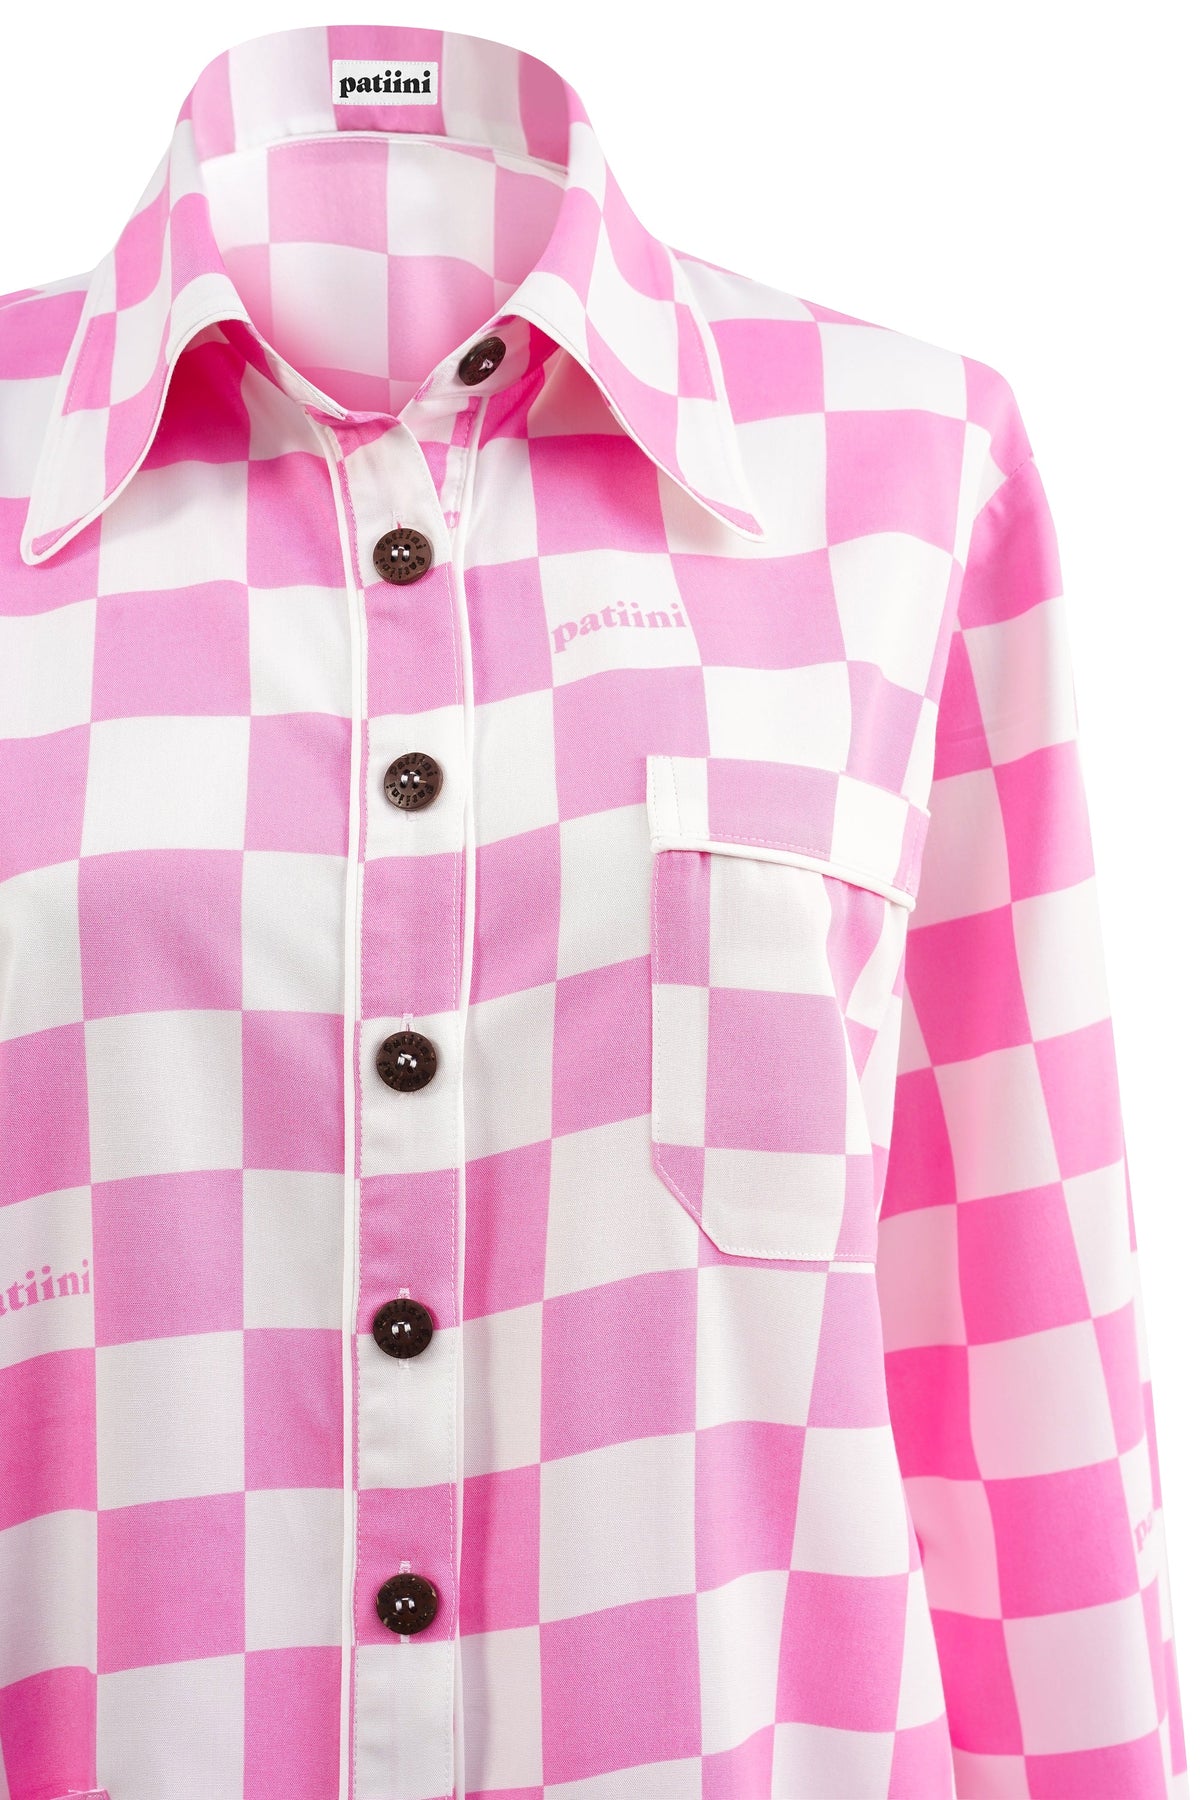 Close up of pink and white checkered pajama shirt with coconut shell buttons.